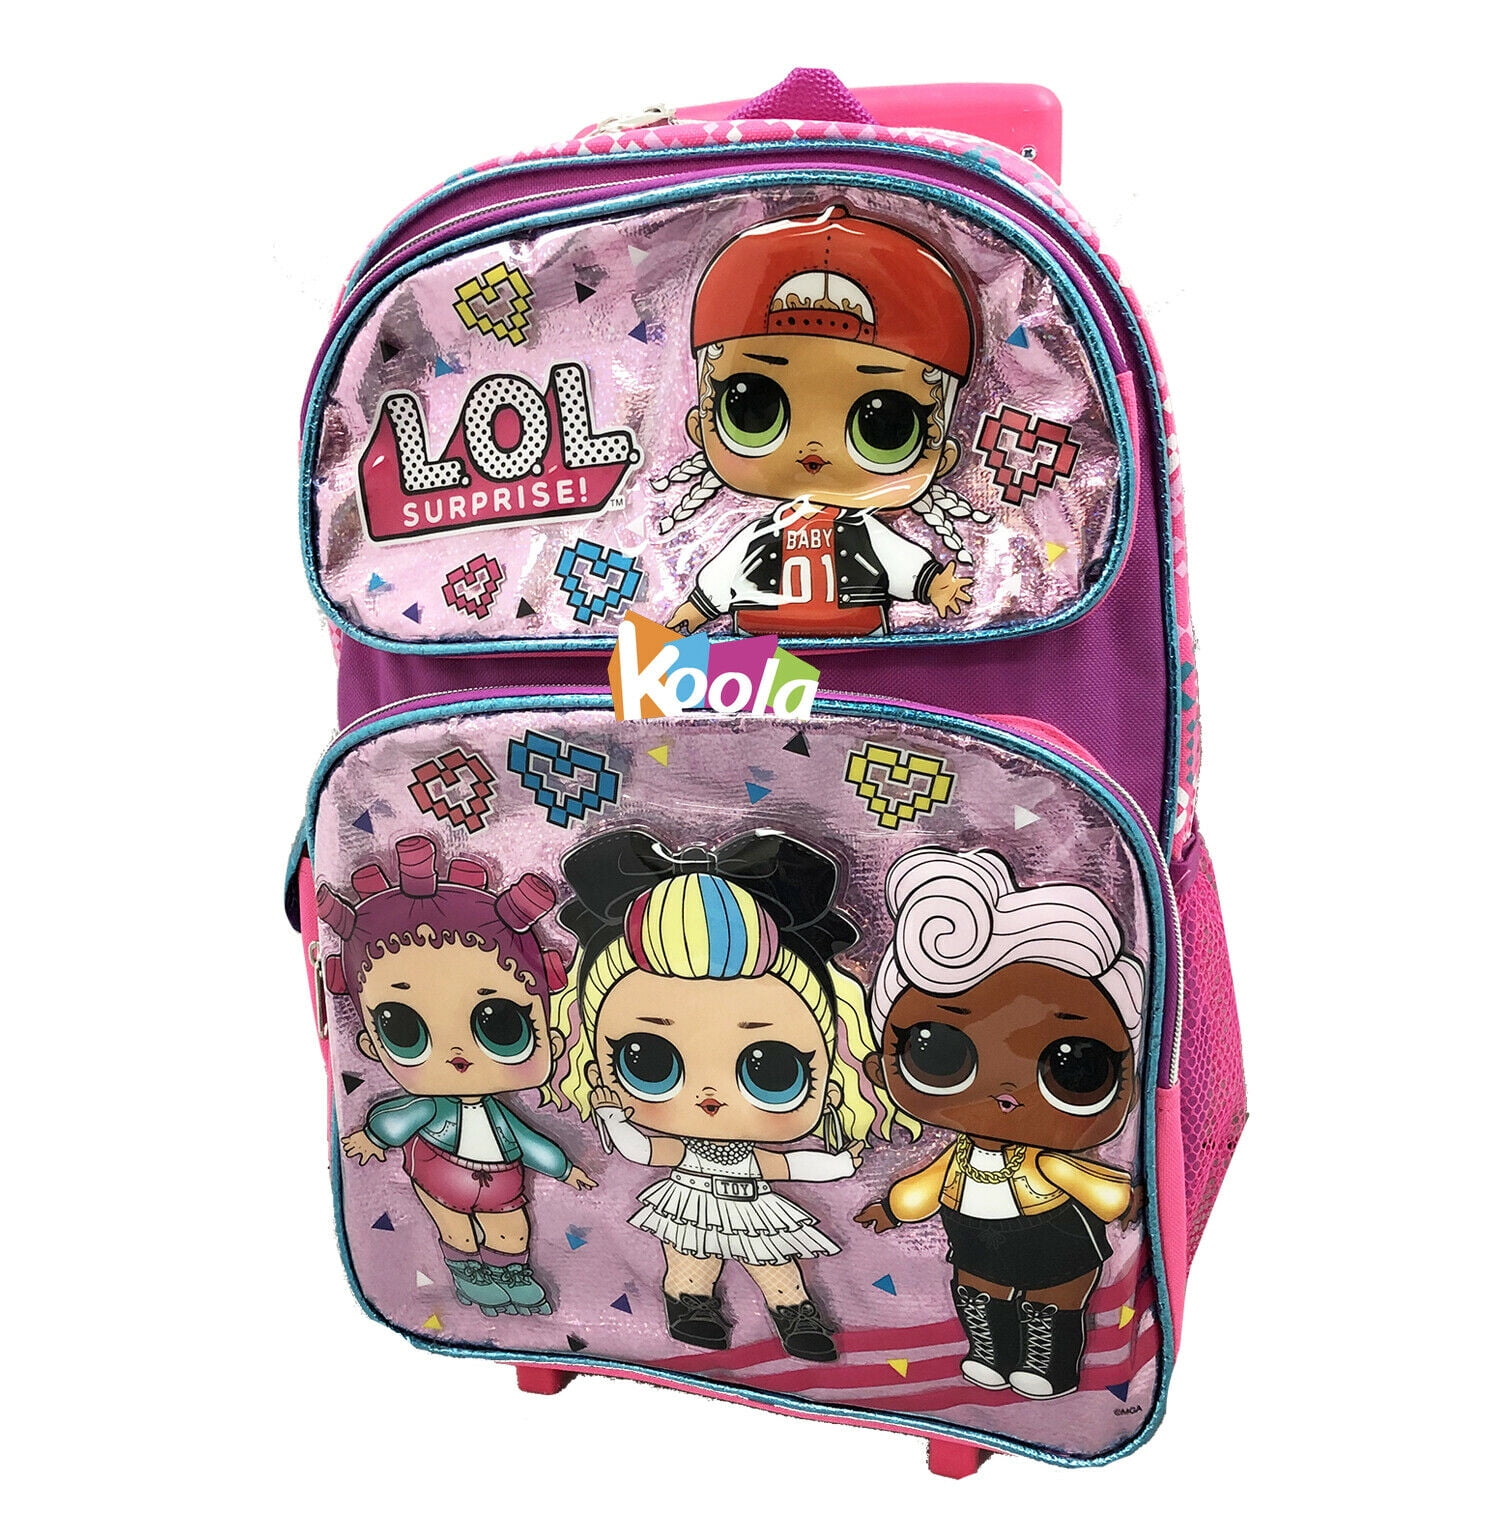 LOL Surprise Girls Backpack Book Bag Toddler School Kids Pink Toy Gift 12" Small 